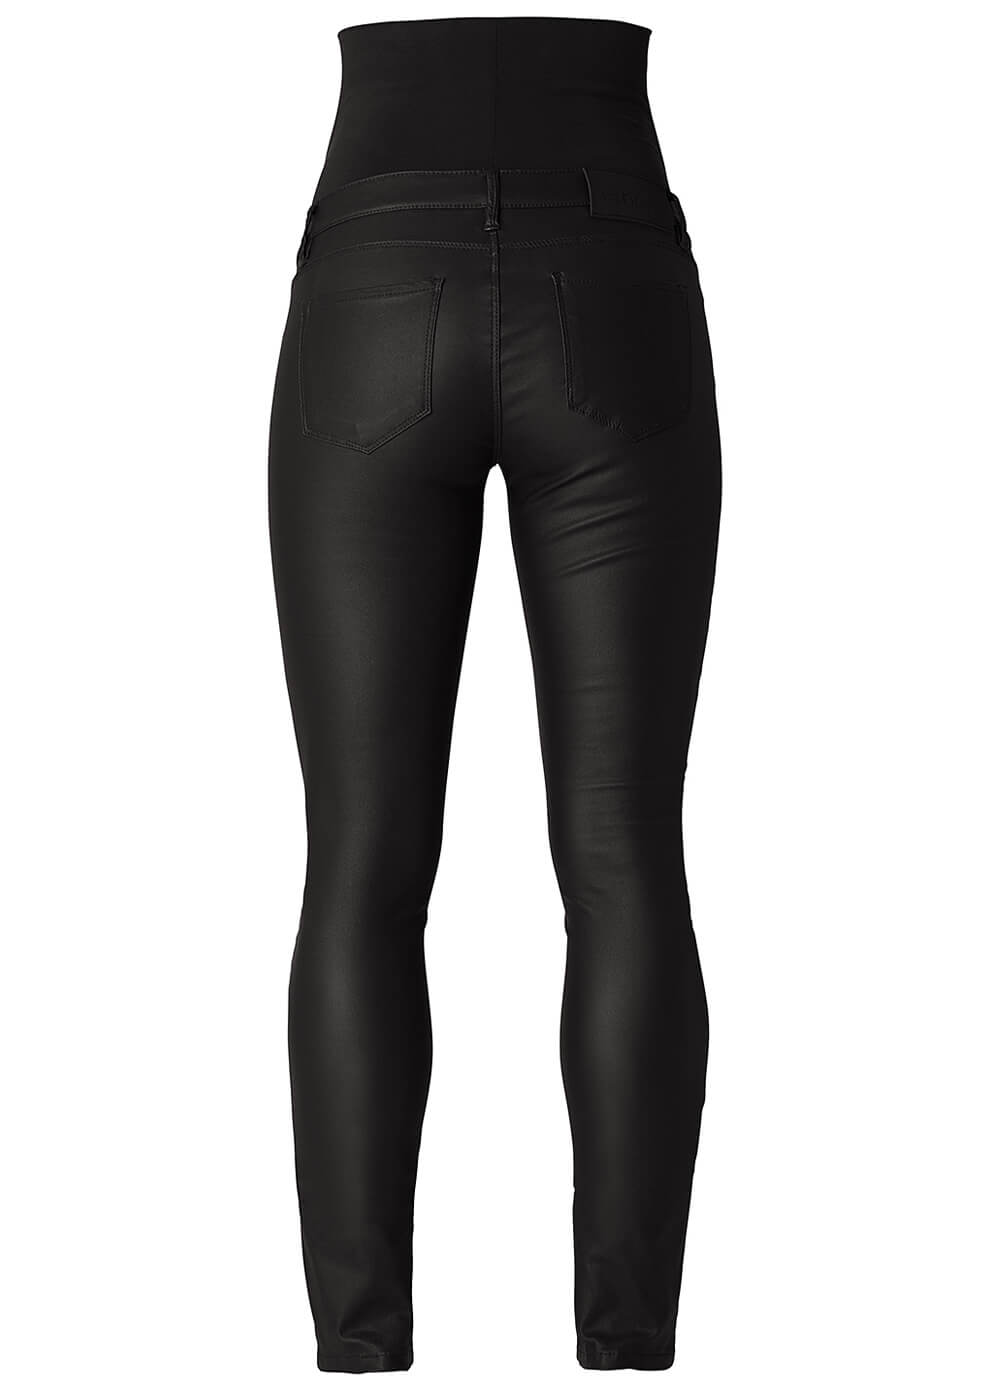 Jessie Coated Skinny Black Maternity Jeans by Noppies